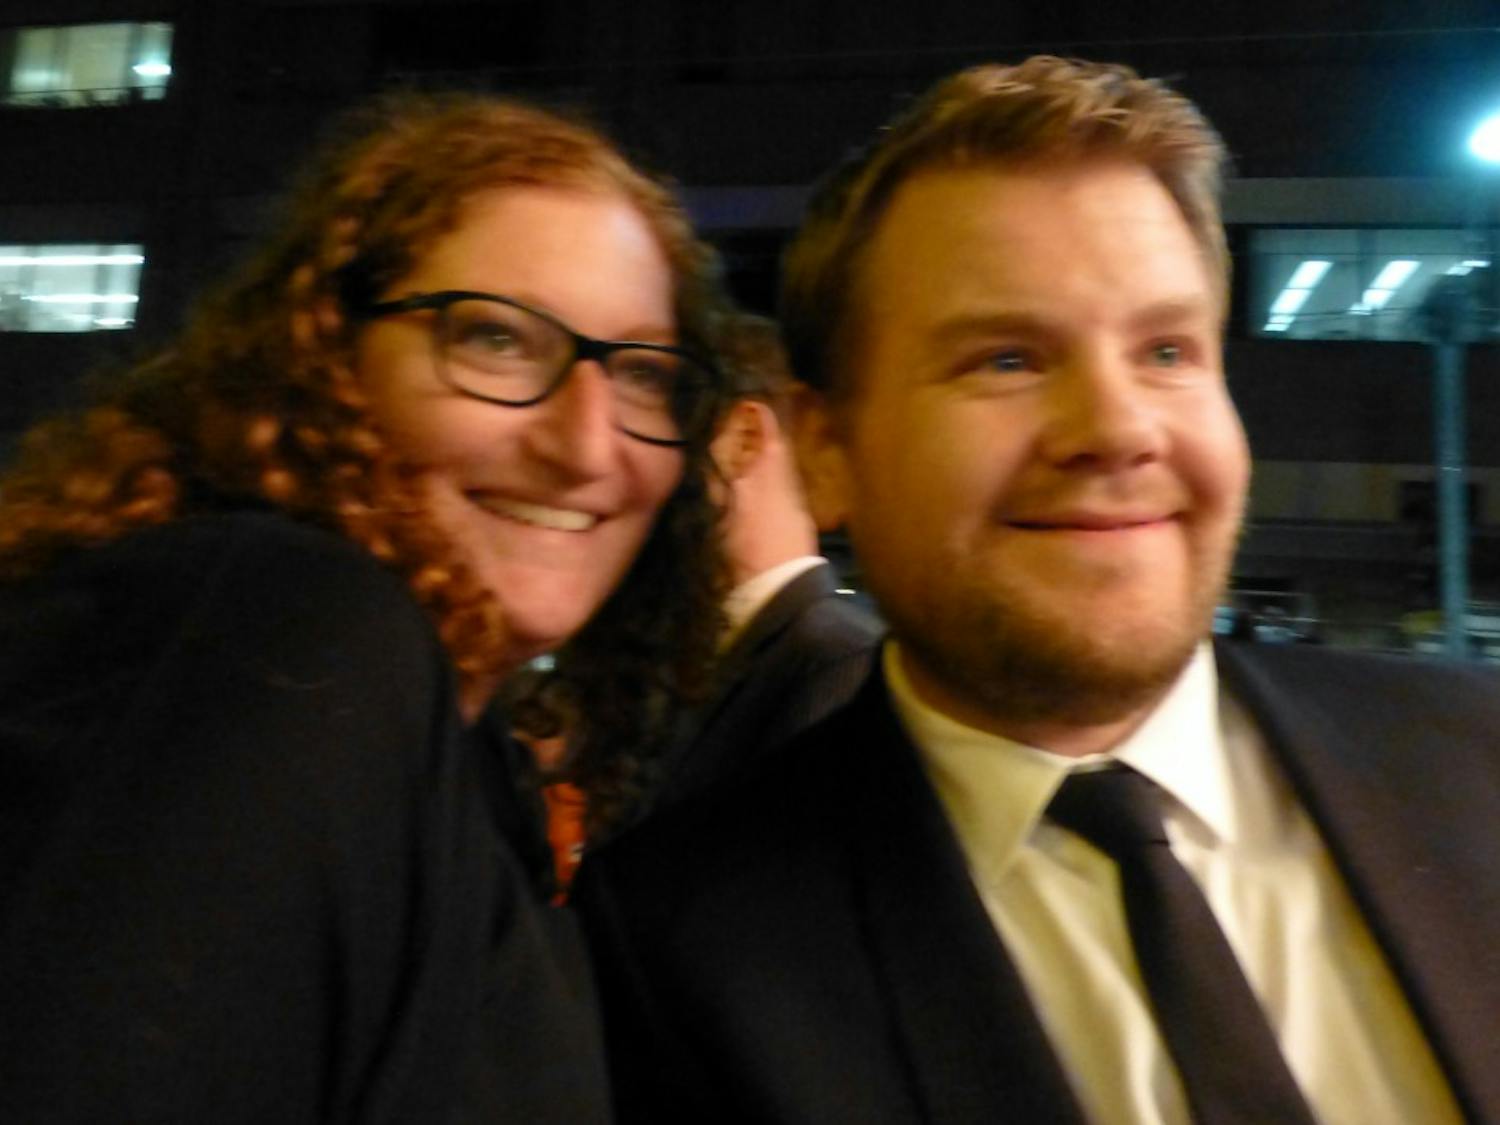 Fan with James Corden at the premiere of One Chance, Toronto Film Festival 2013 (WikiCommons)